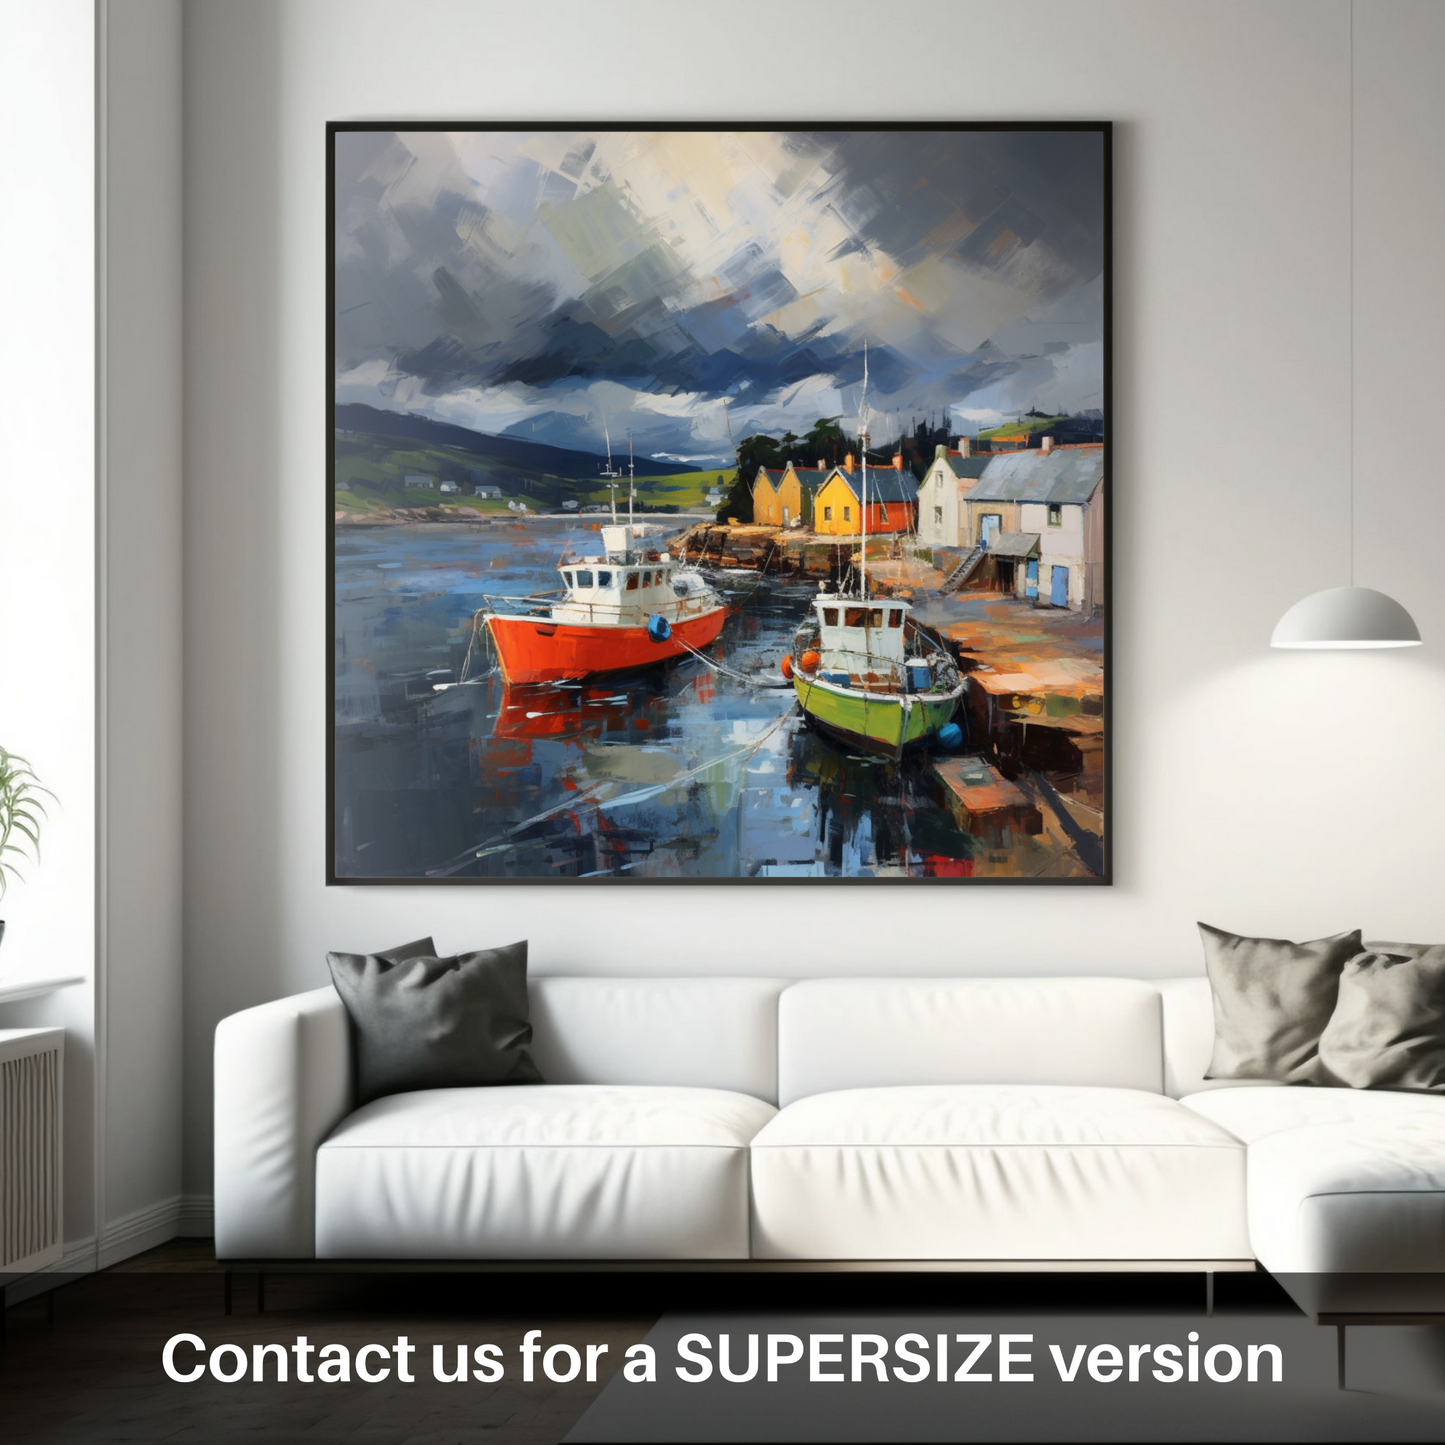 Huge supersize print of Cromarty Harbour with a stormy sky